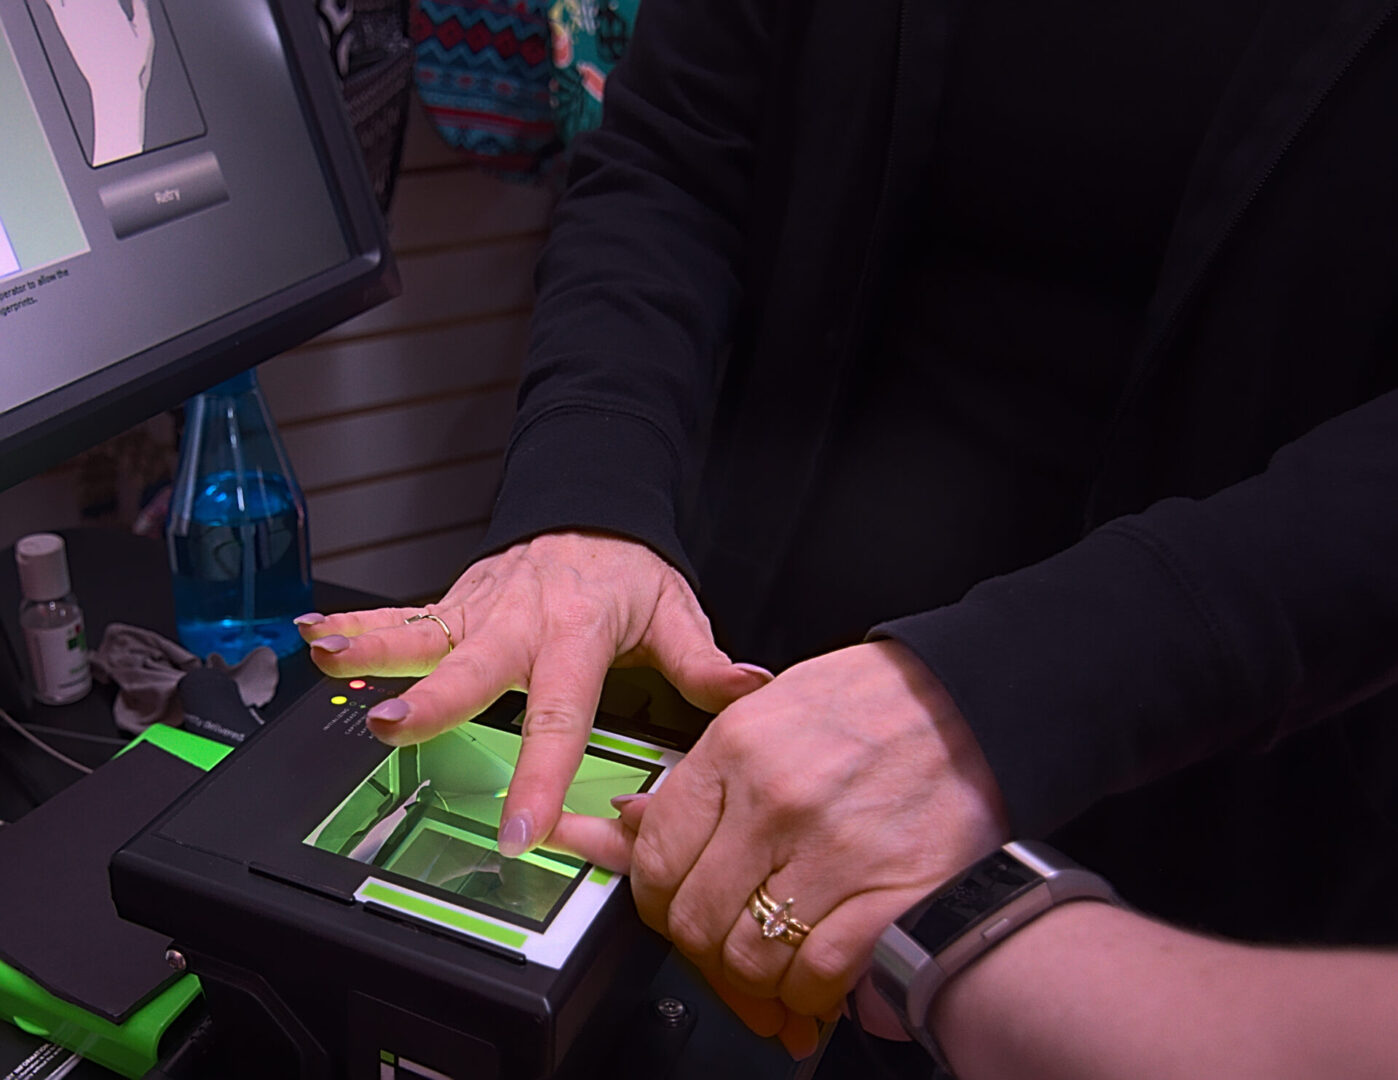 A young woman gets her finger prints scanned live as a requirement to getting a job as a travel occupational therapist.